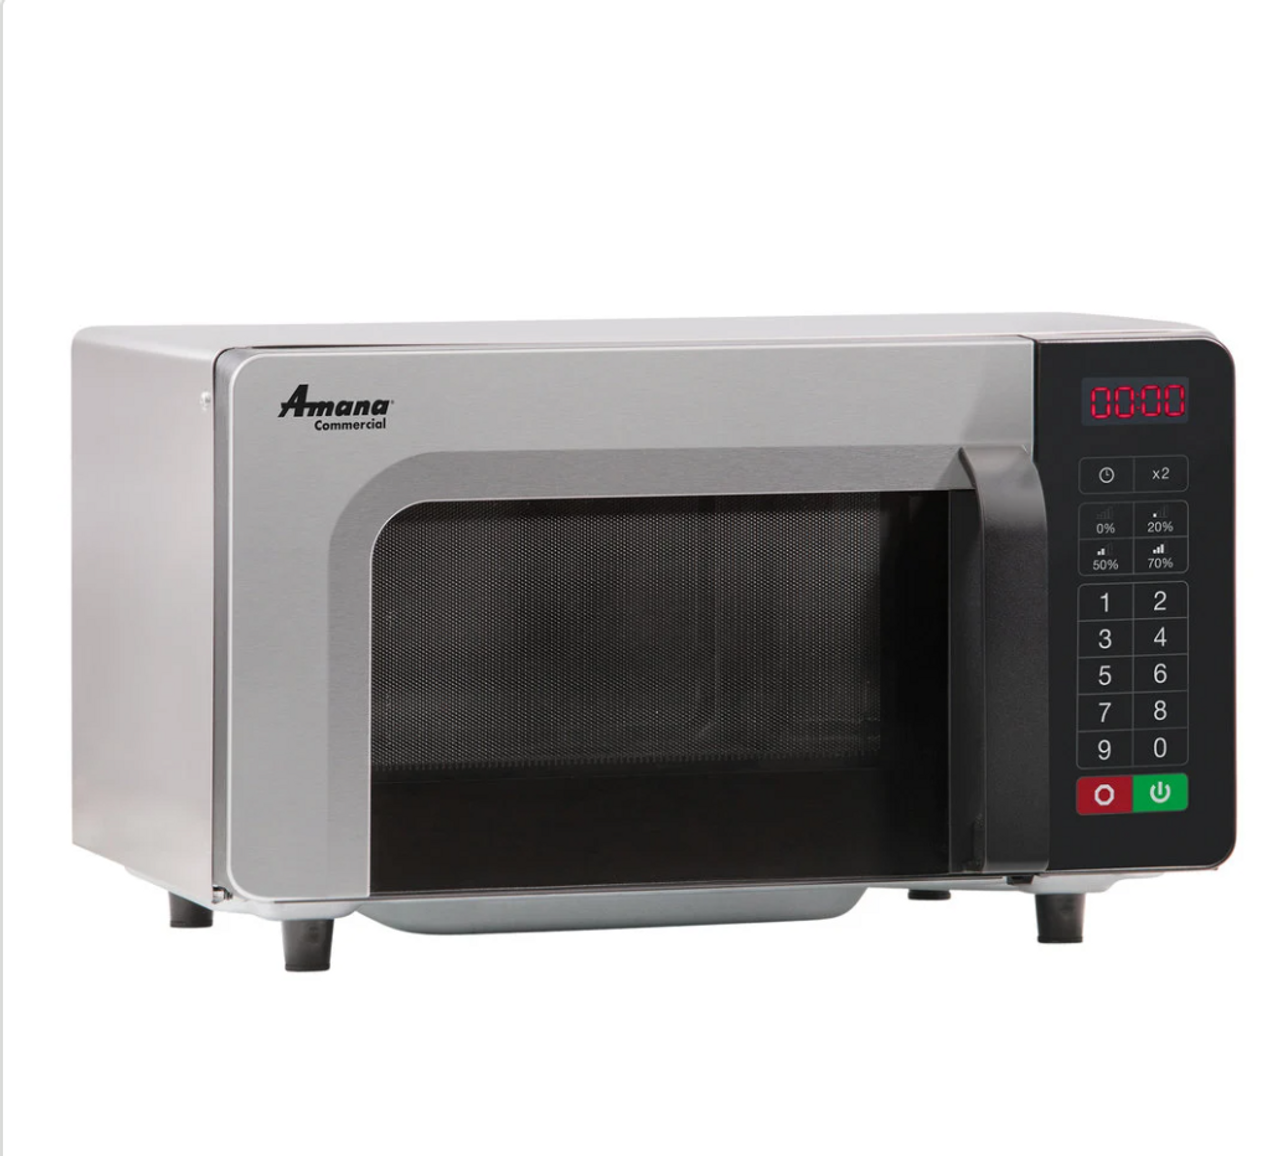 Stainless Steel Commercial Microwave with Push Button Controls - 120V, 1000W-Amana RMS10TS 